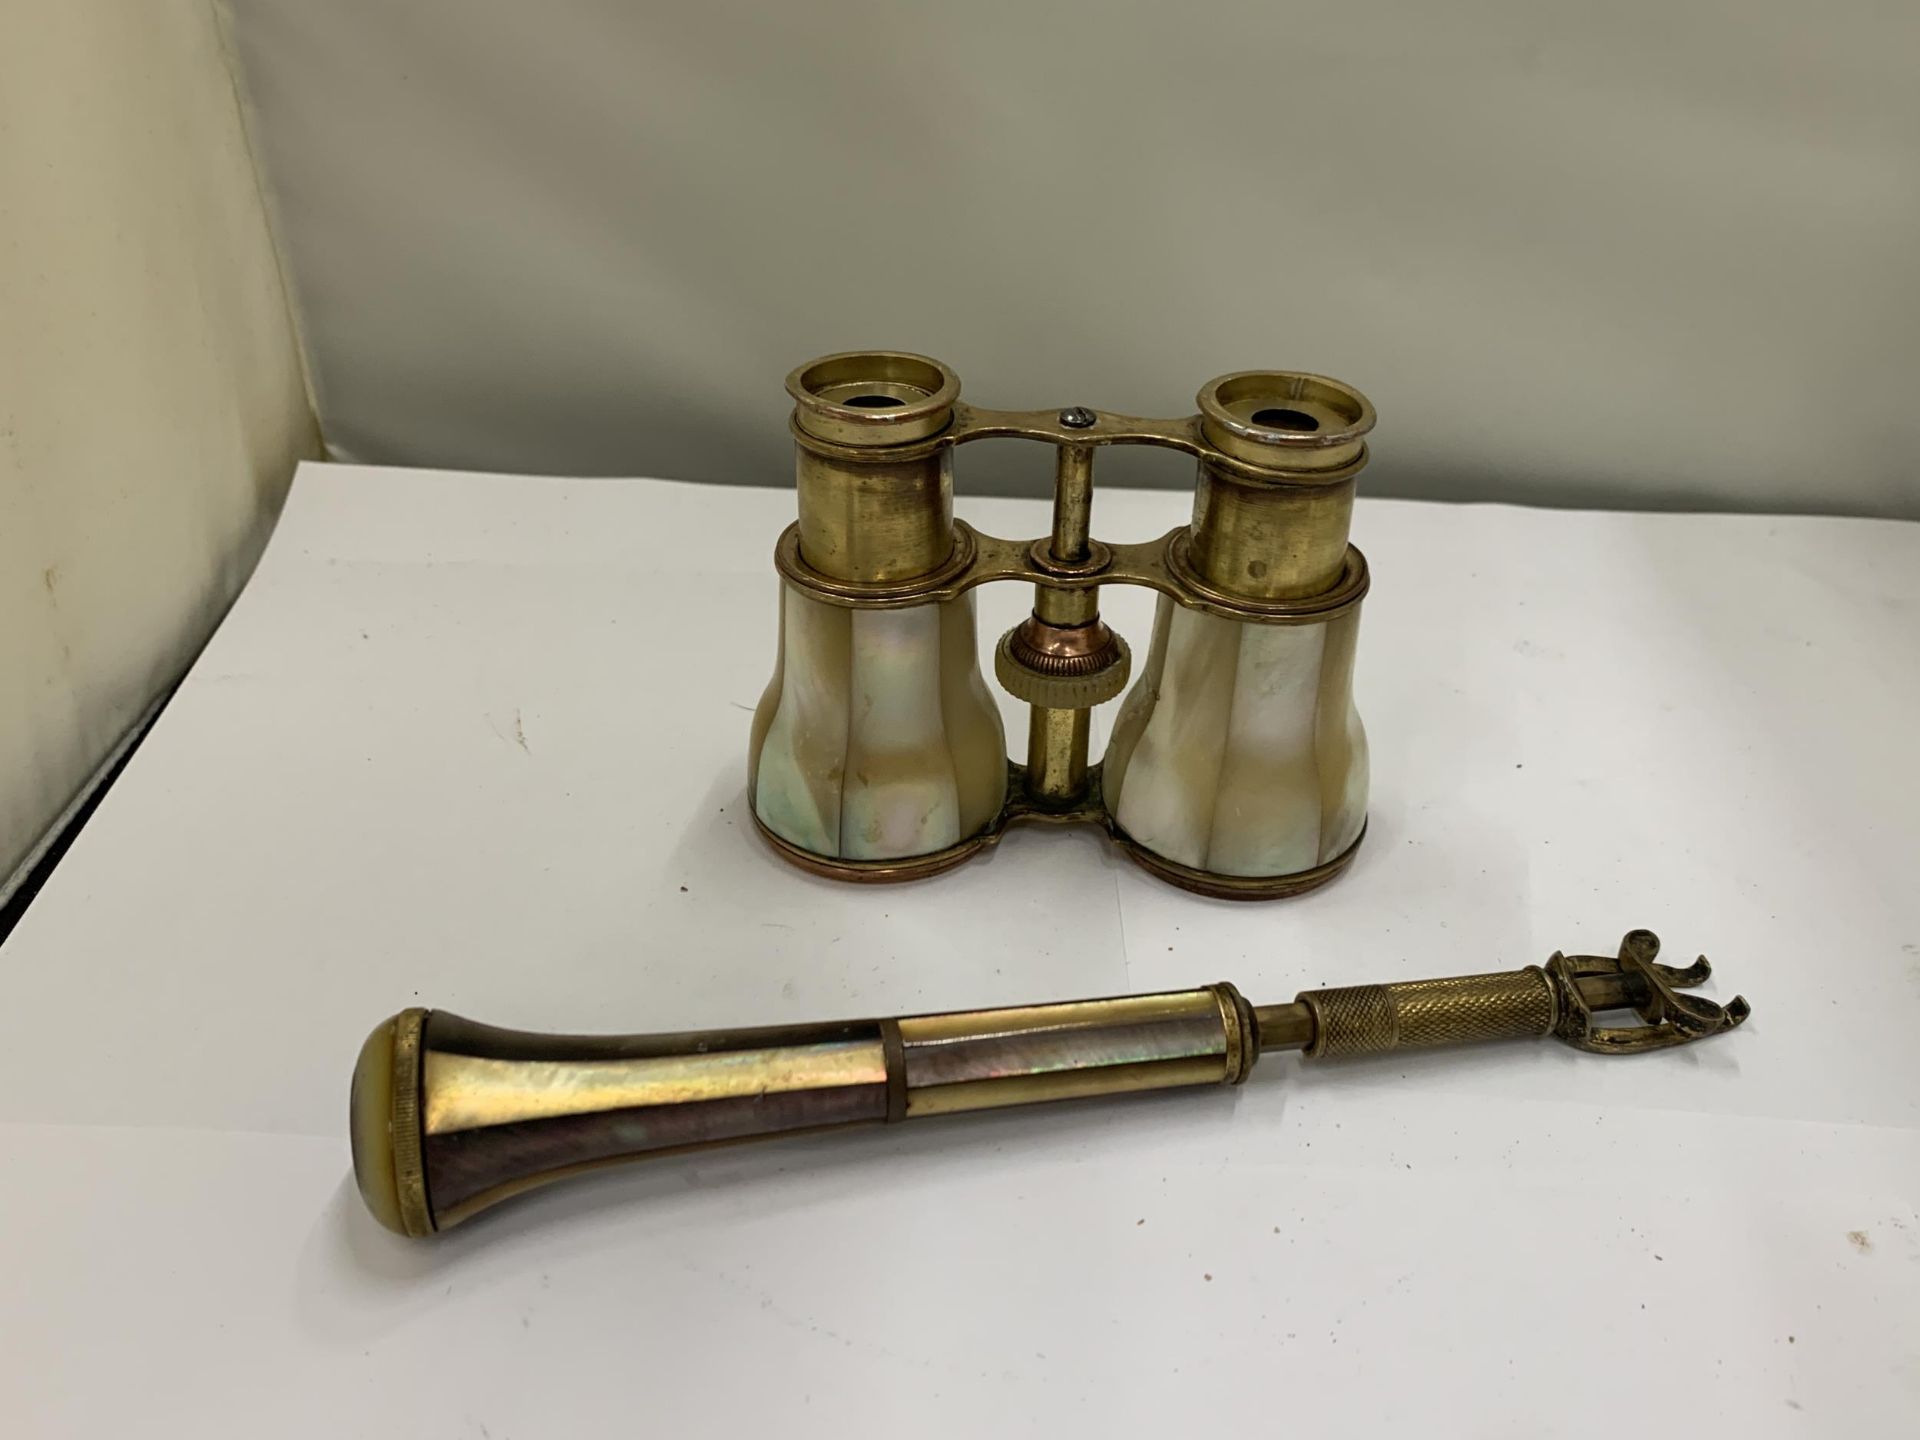 AN ANTIQUE PAIR OF MOTHER OF PEARL OPERA GLASSES WITH A MATCHING HANDLE